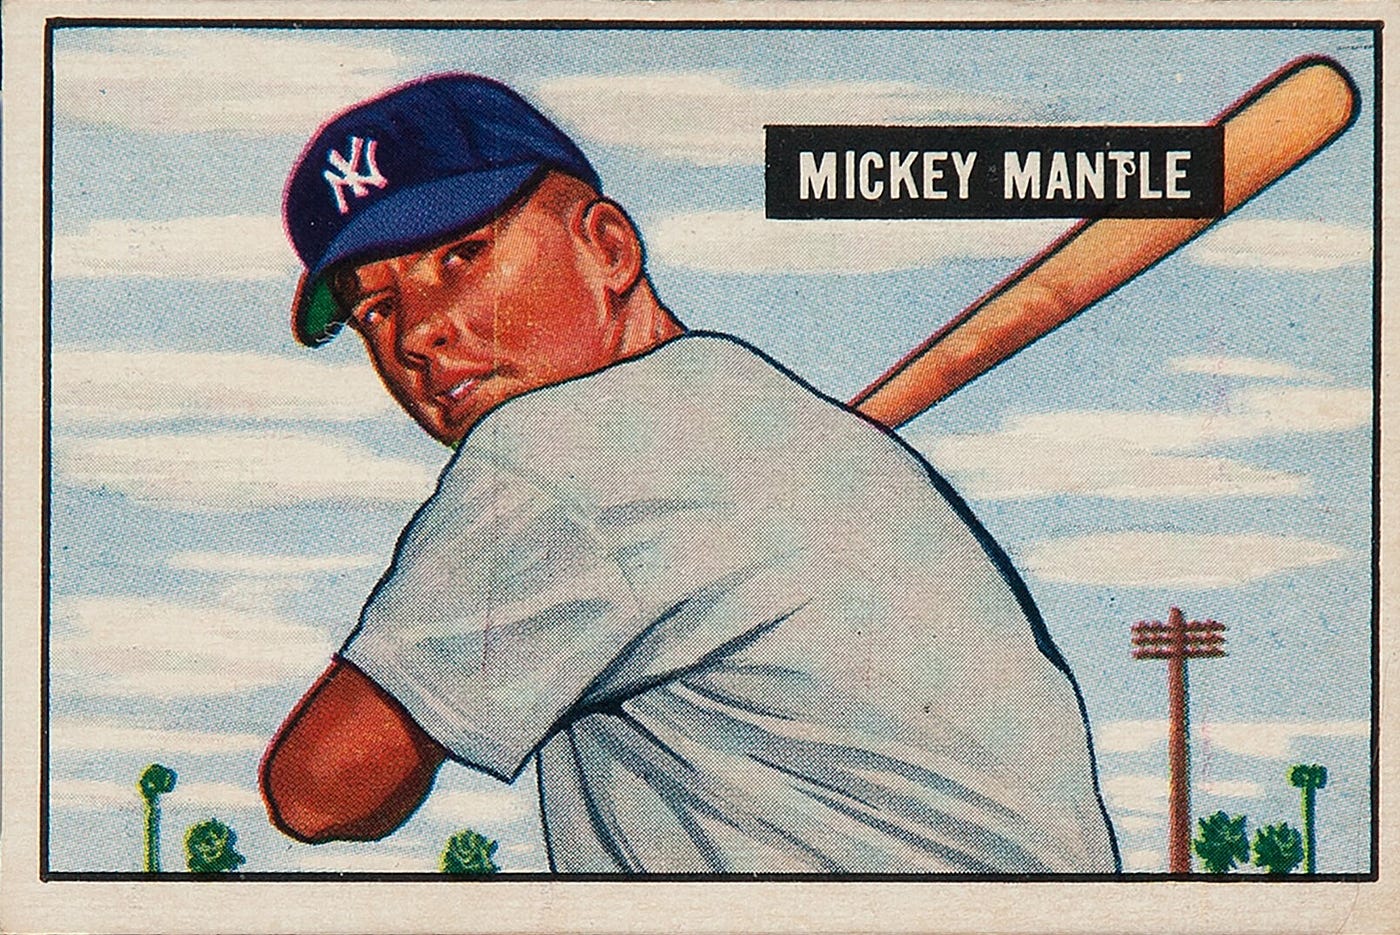 The 1952 Topps Mantle Card. Baseball in 25 Objects: nineteenth in…, by  John Thorn